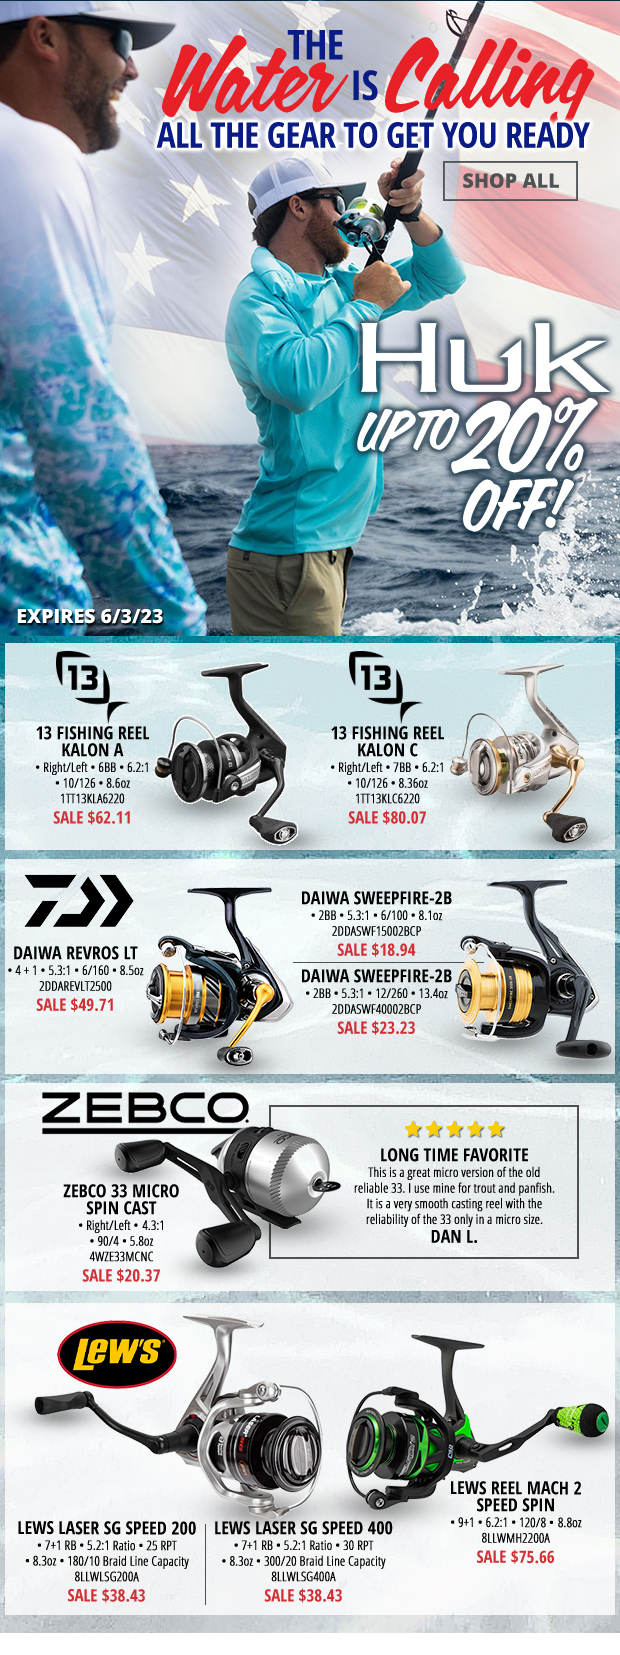 Gear to Get You on the Water & Huk Up to 20% Off